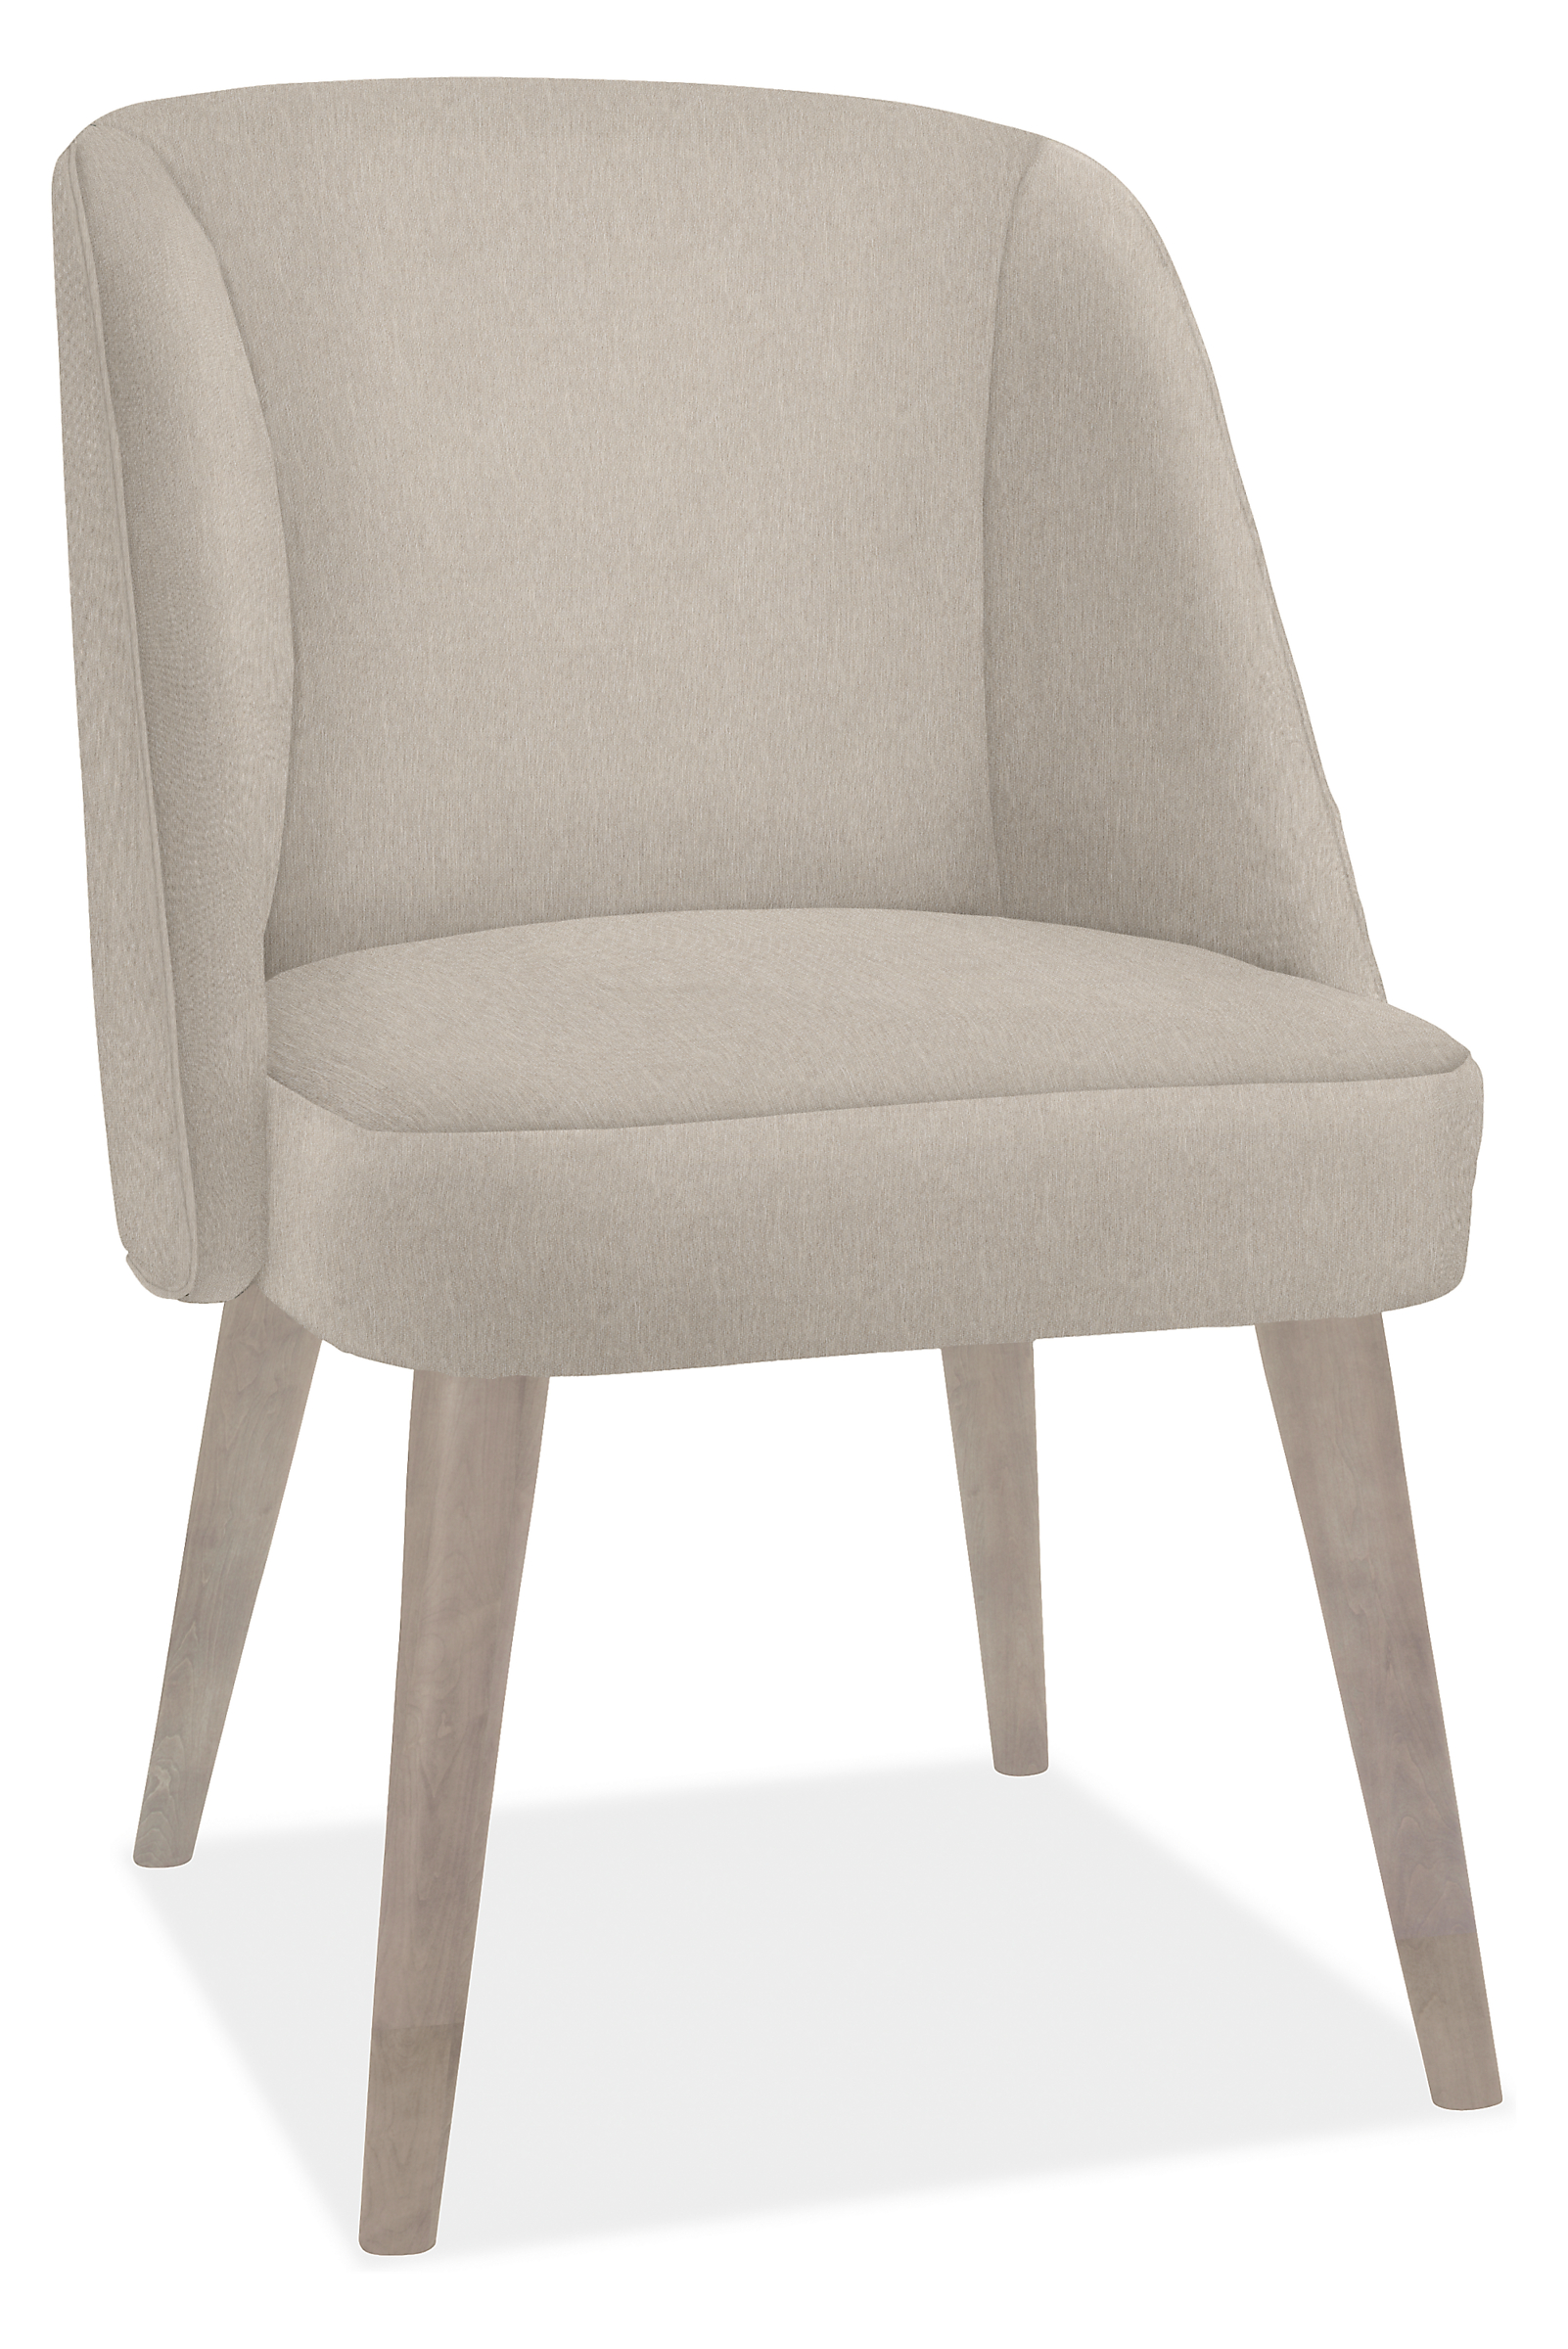 Cora Side Chair in Flint Oatmeal with Shell Legs